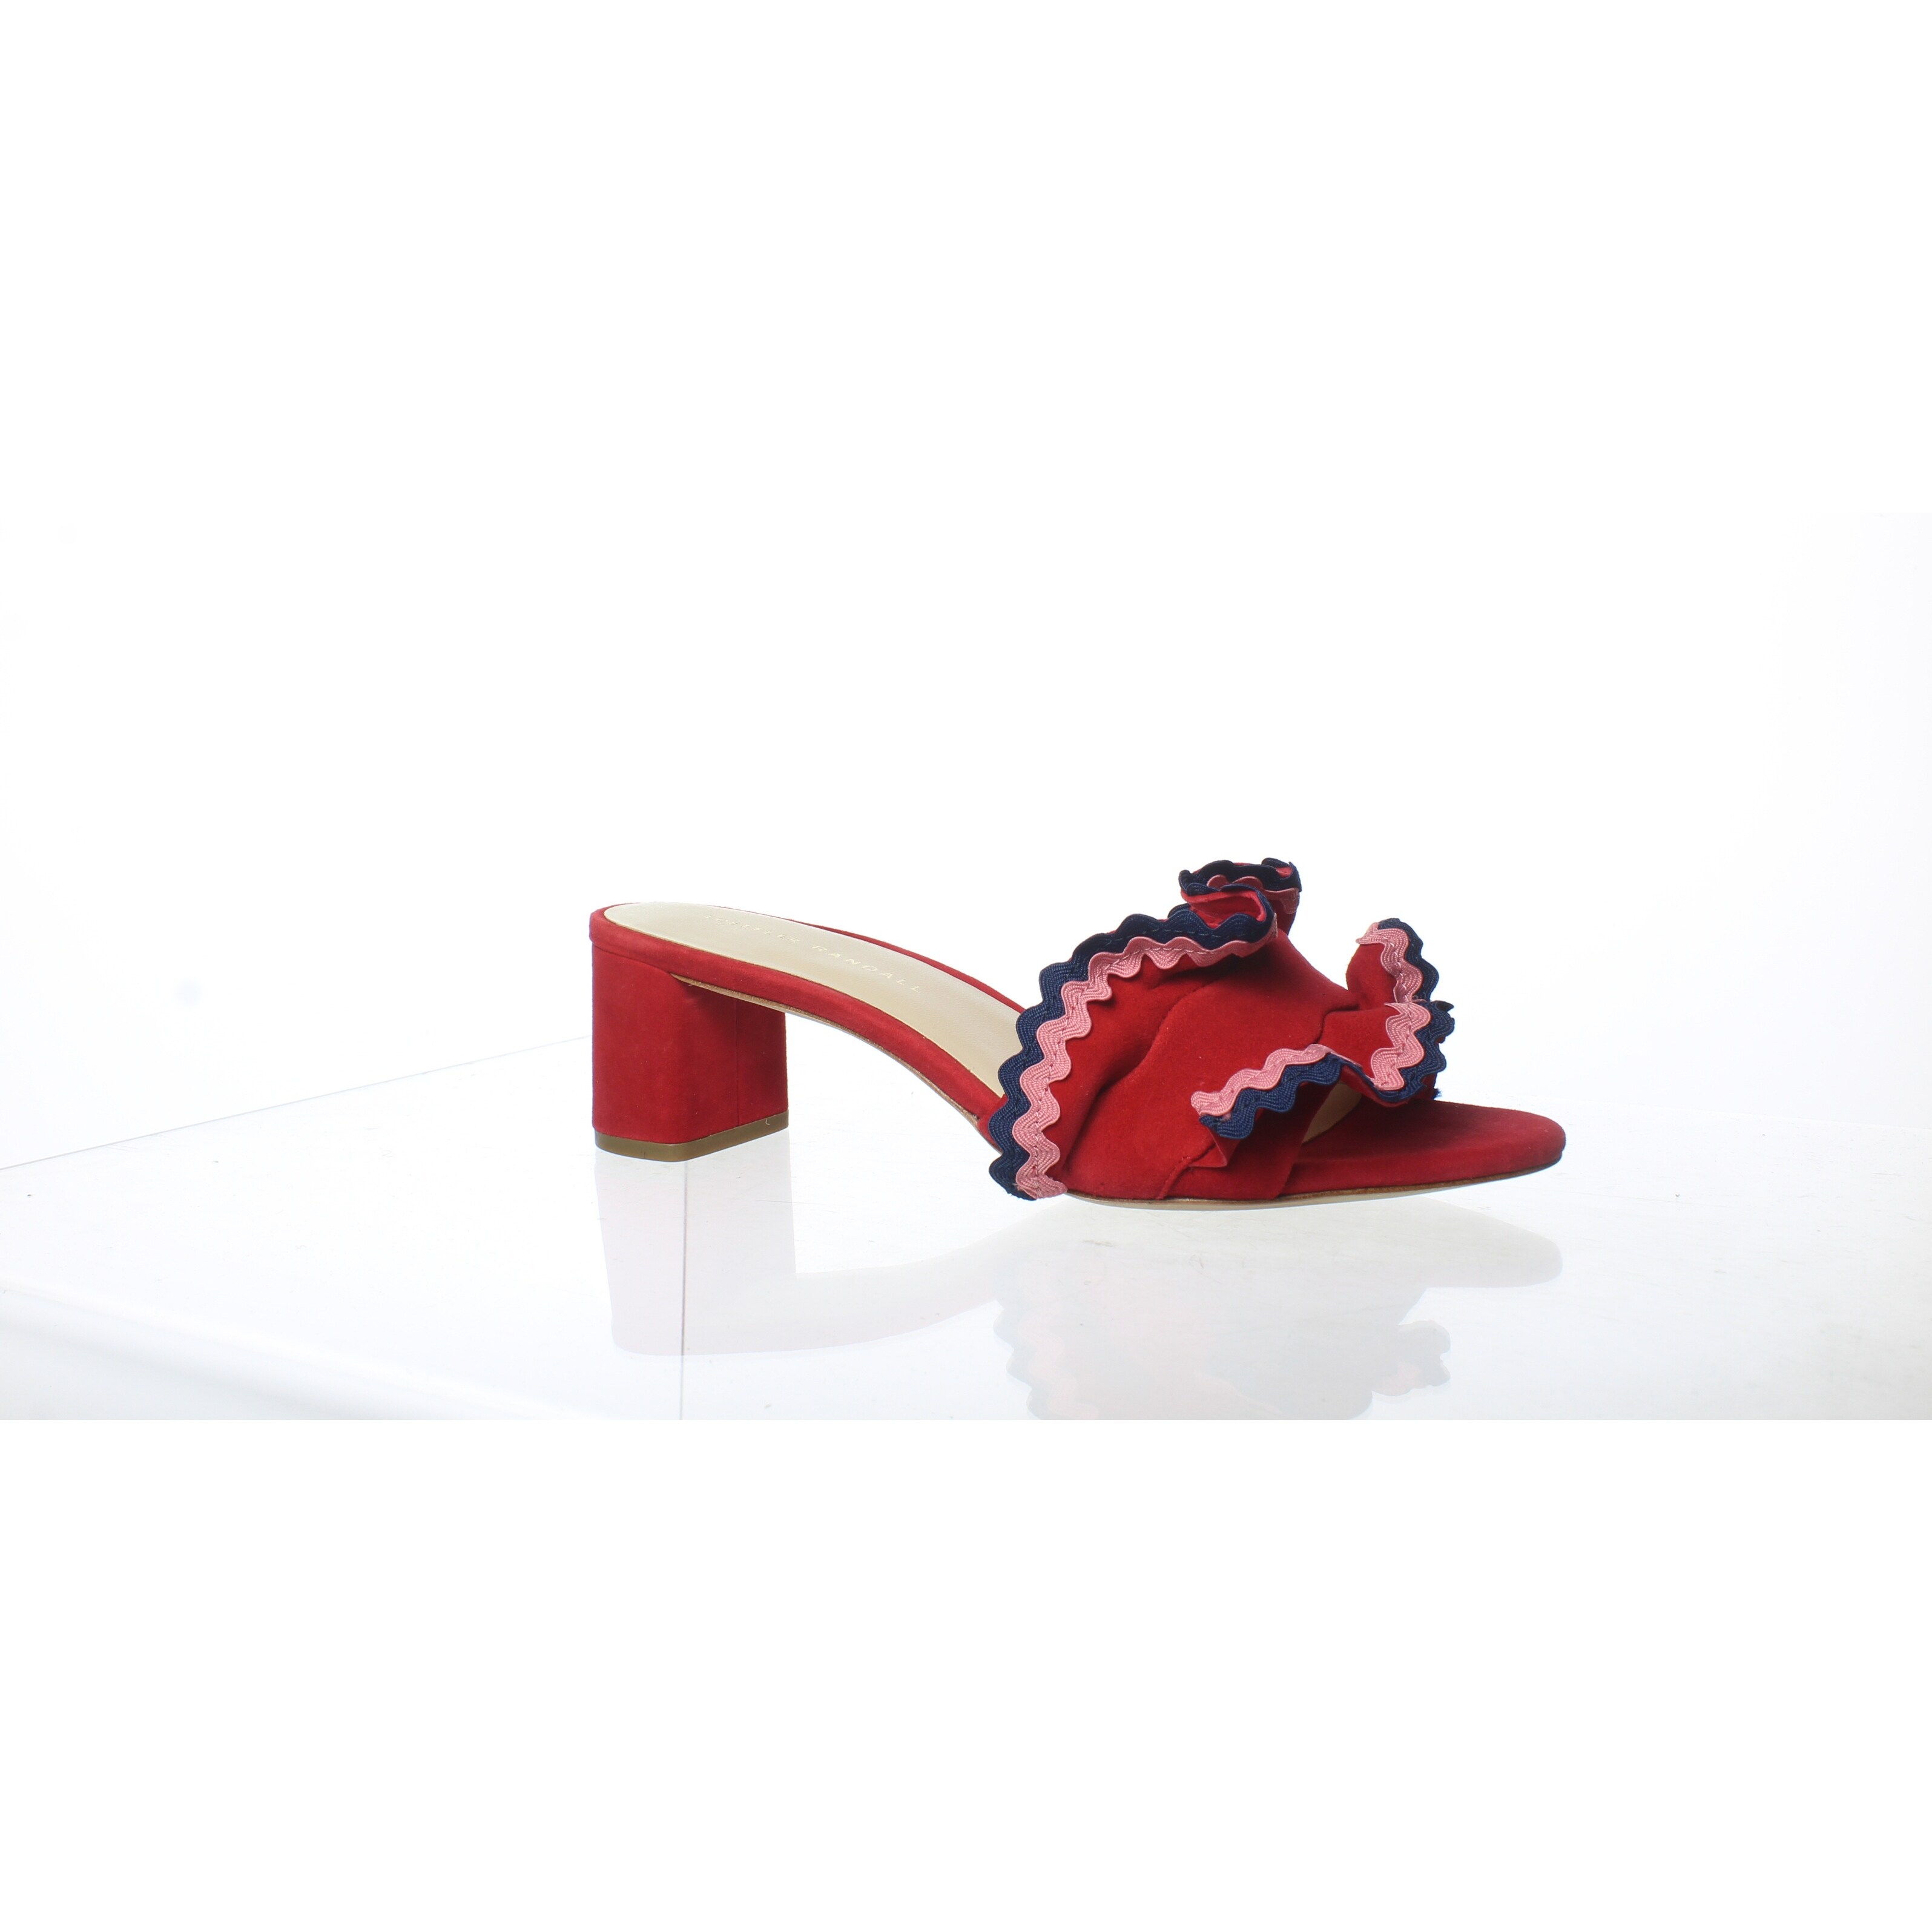 red sandals size 6